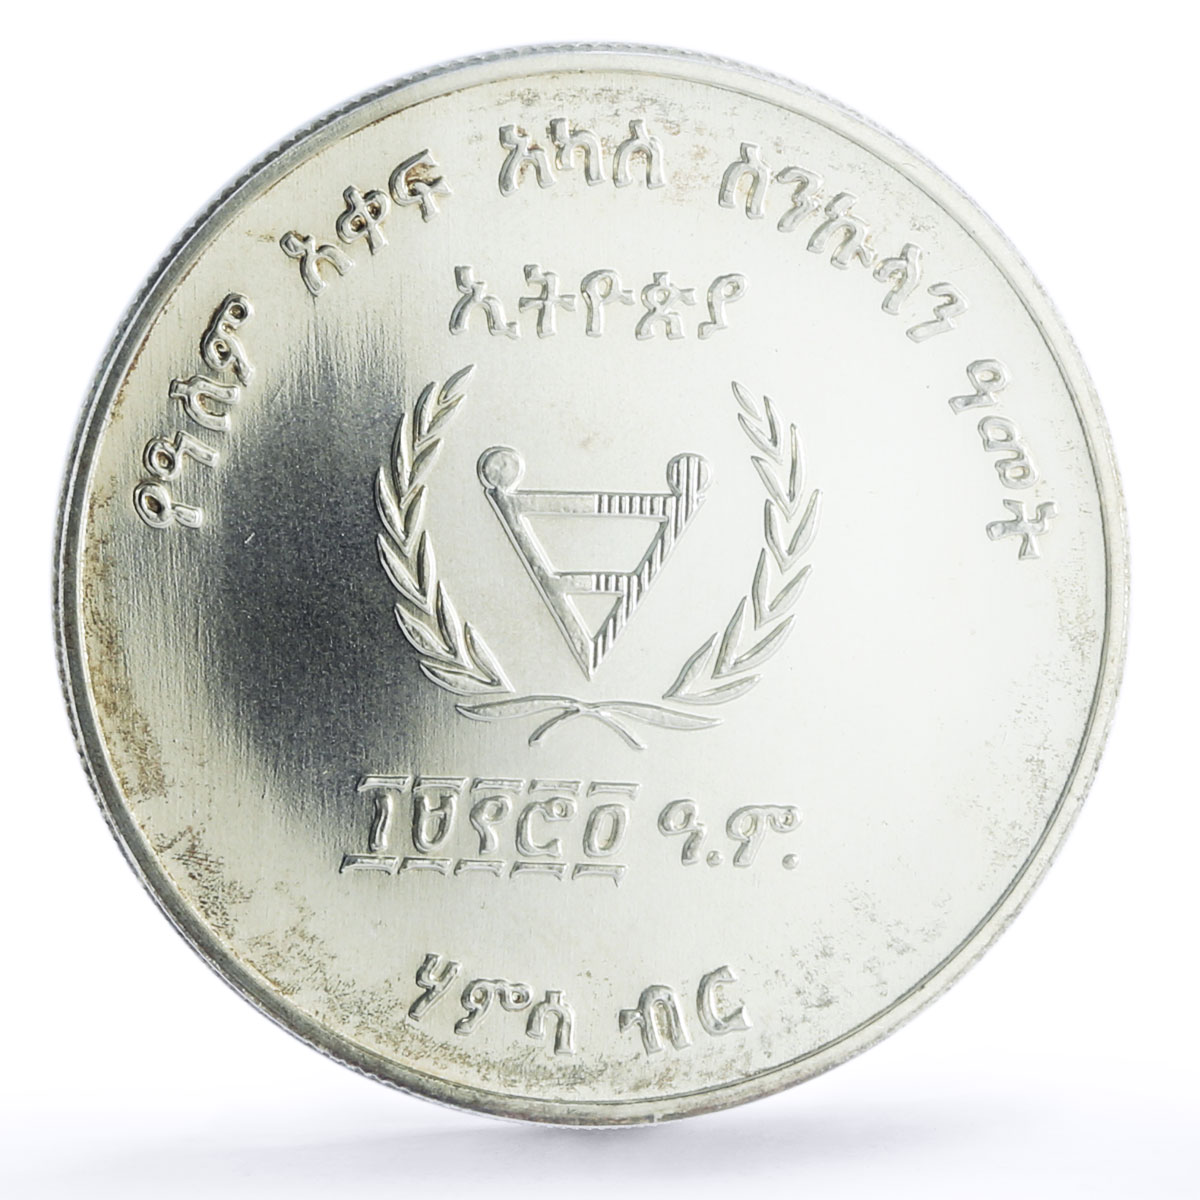 Ethiopia 50 birr International Year Disabled Persons MS67 PCGS Ag (1982) 1974